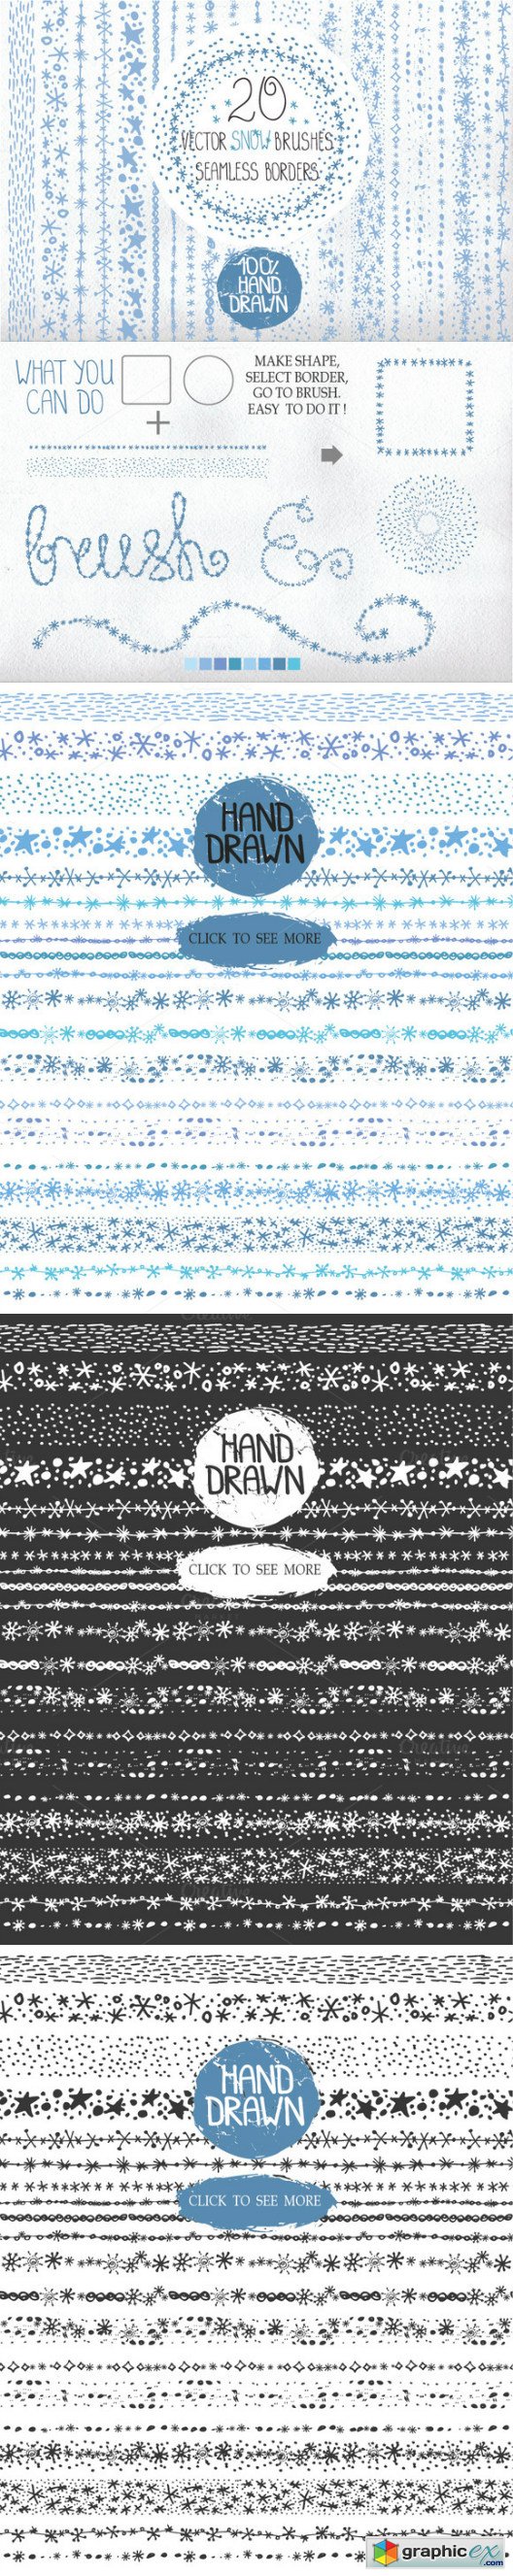 Hand drawn snow borders brushes